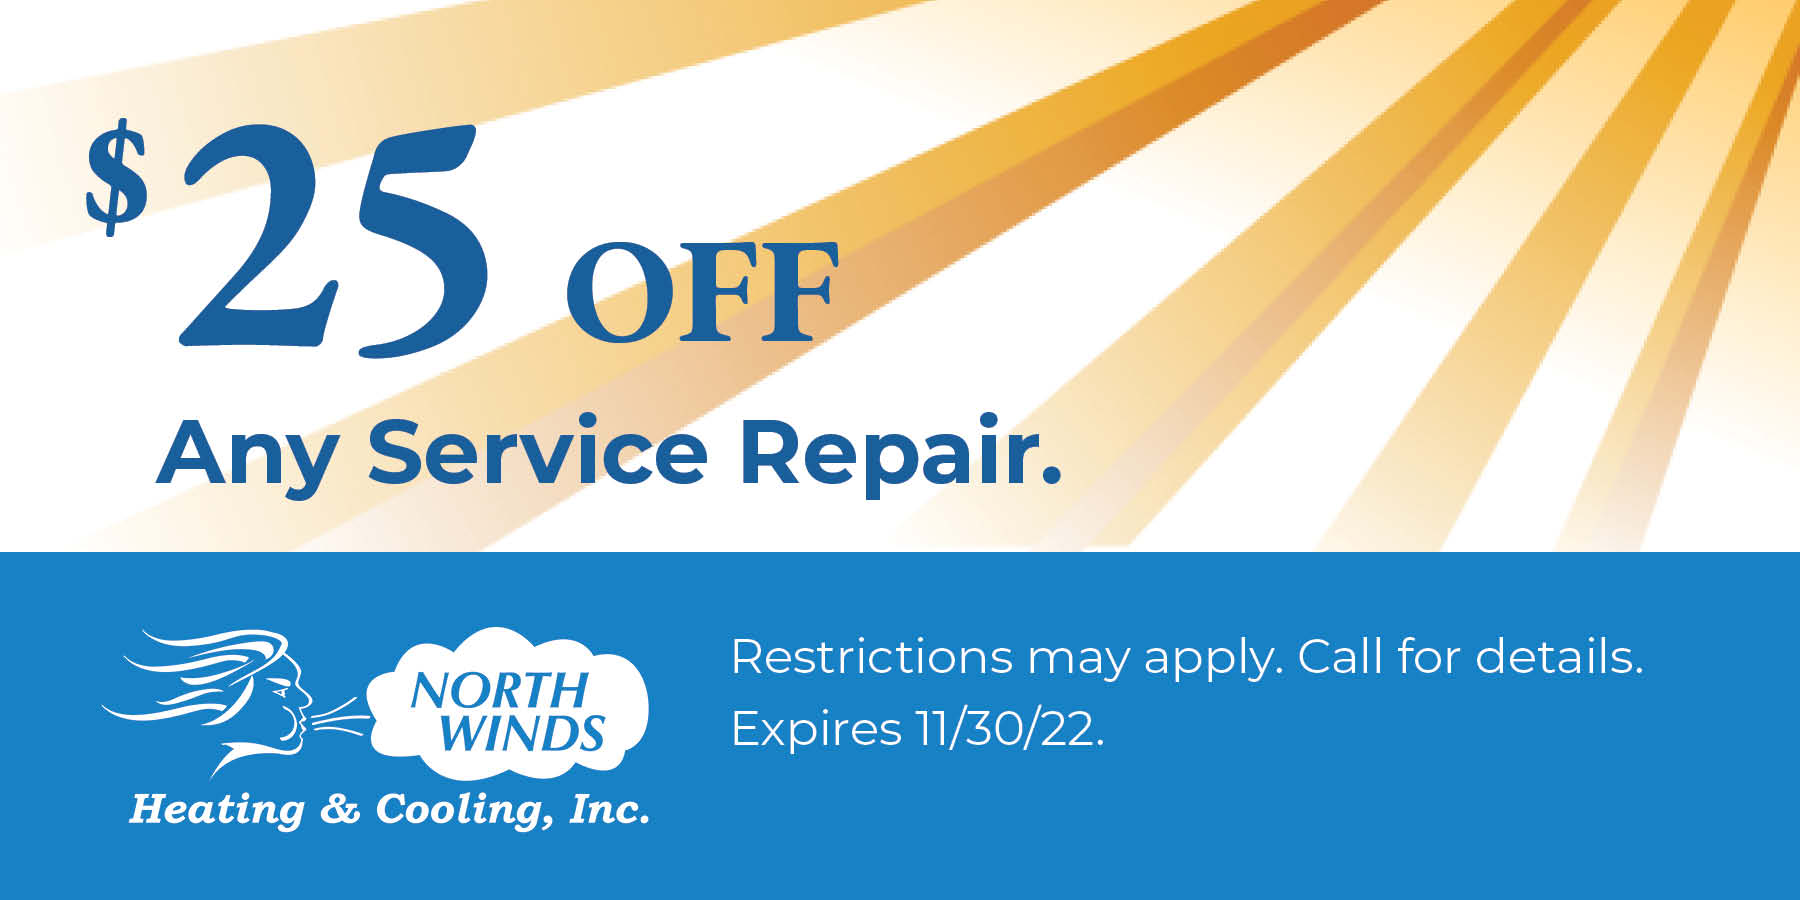  off any service repair. restrictions may apply. expires 11/30/22. Contact us for details.